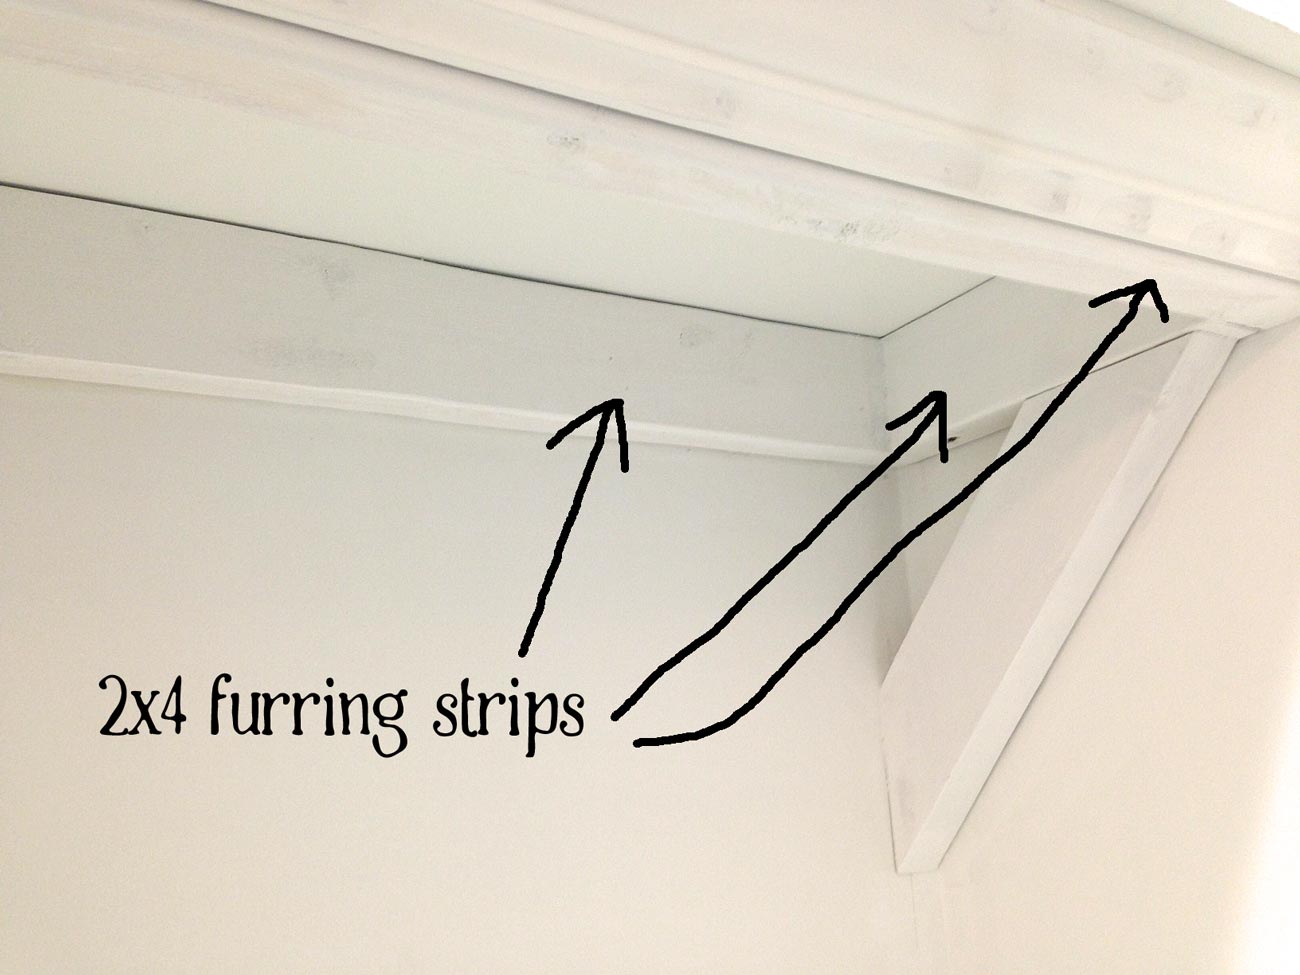 How to build sturdy shelves (plus tips for working with 